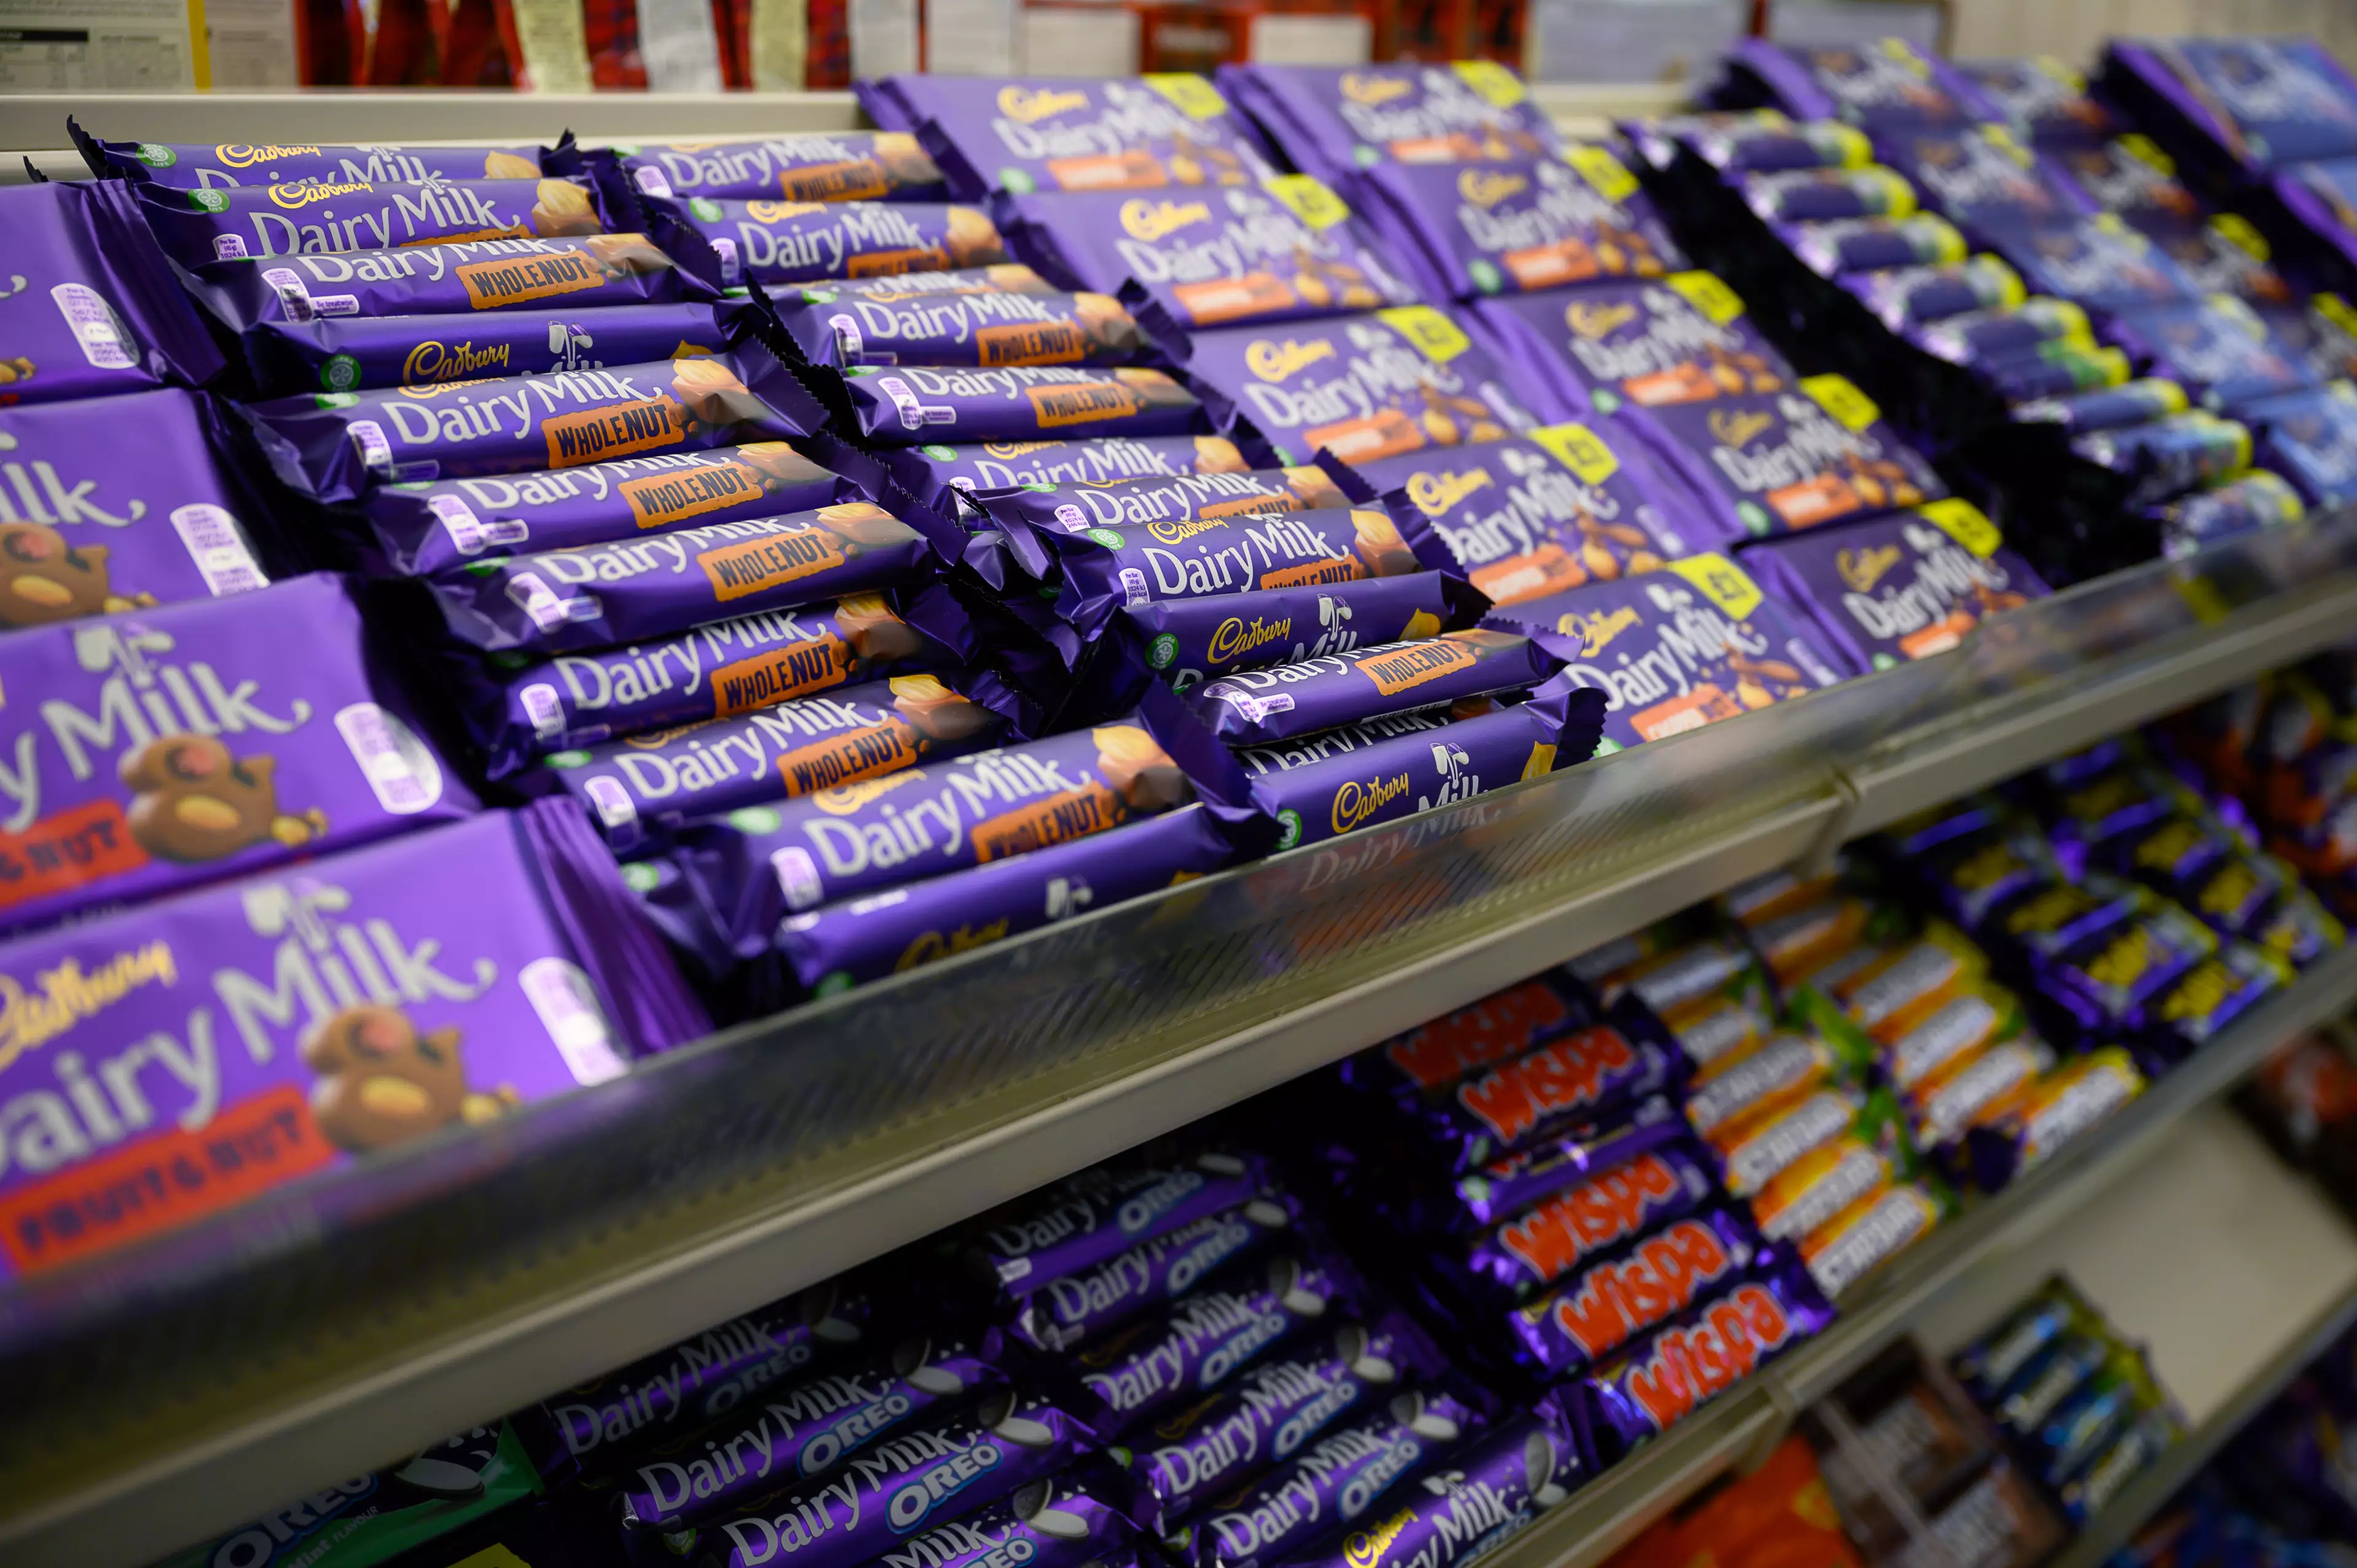 There's a reason supermarkets don't refrigerate chocolate... just sayin' (